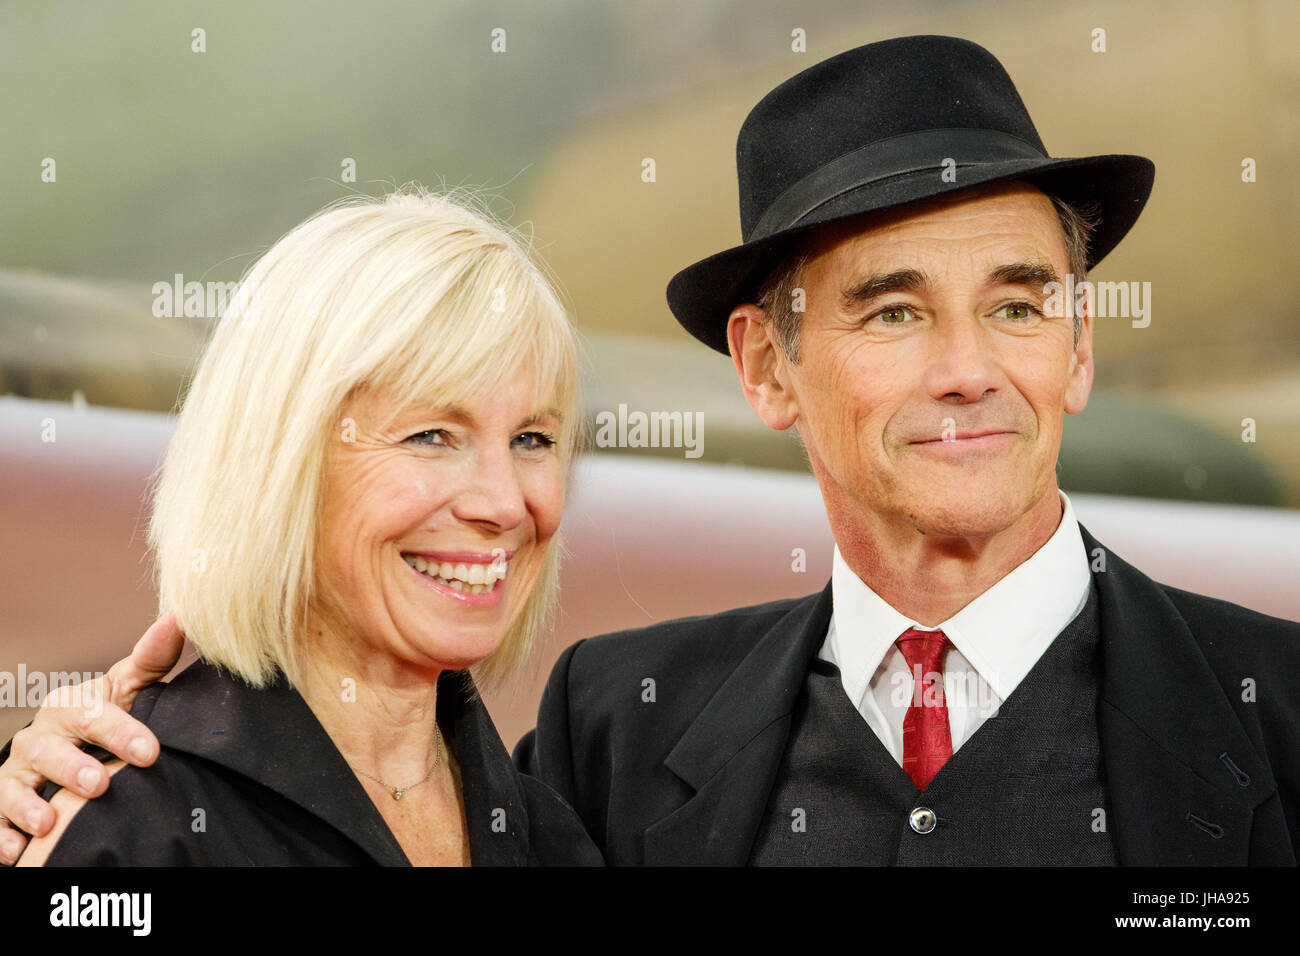 London, UK. 13th July, 2017. Mark Rylance , Claire van Kampen at World Premiere of DUNKIRK on Thursday 13 July 2017 held at ODEON Leicester Square, London. Pictured: Mark Rylance , Claire van Kampen. Credit: Julie Edwards/Alamy Live News Stock Photo